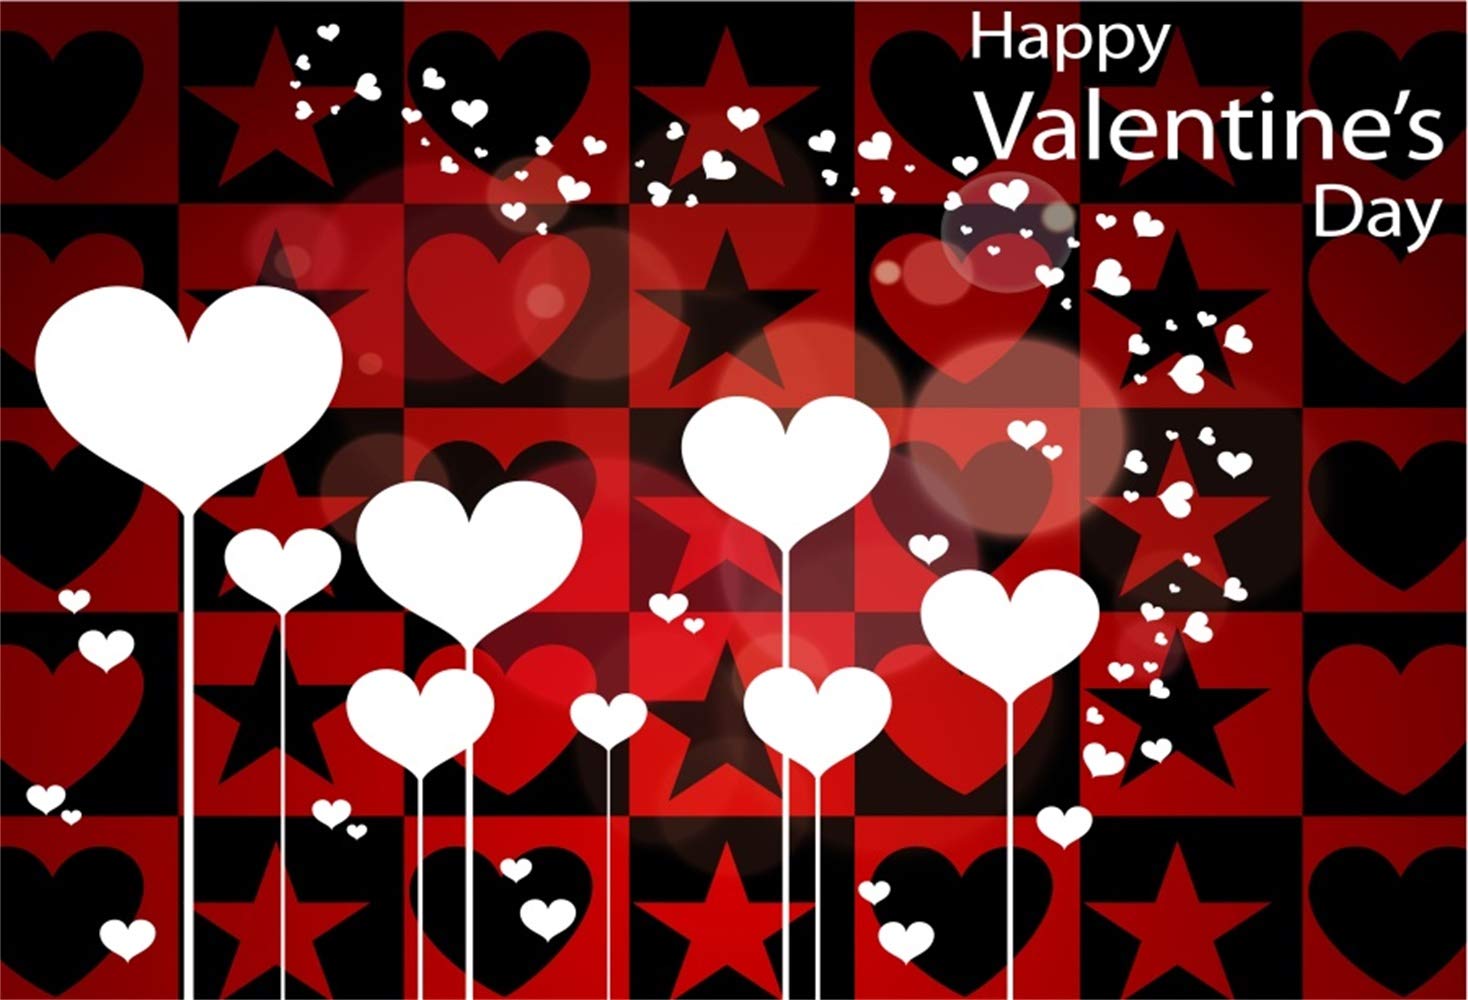 Amazon.com, Laeacco Happy Valentine's Day Backdrop 7x5ft Vinyl White Heart Bars Black and Red Checked Heart Star Design Abstract Haloes Background Lovers Portrait Shoot Greeting Card Wallpaper Studio